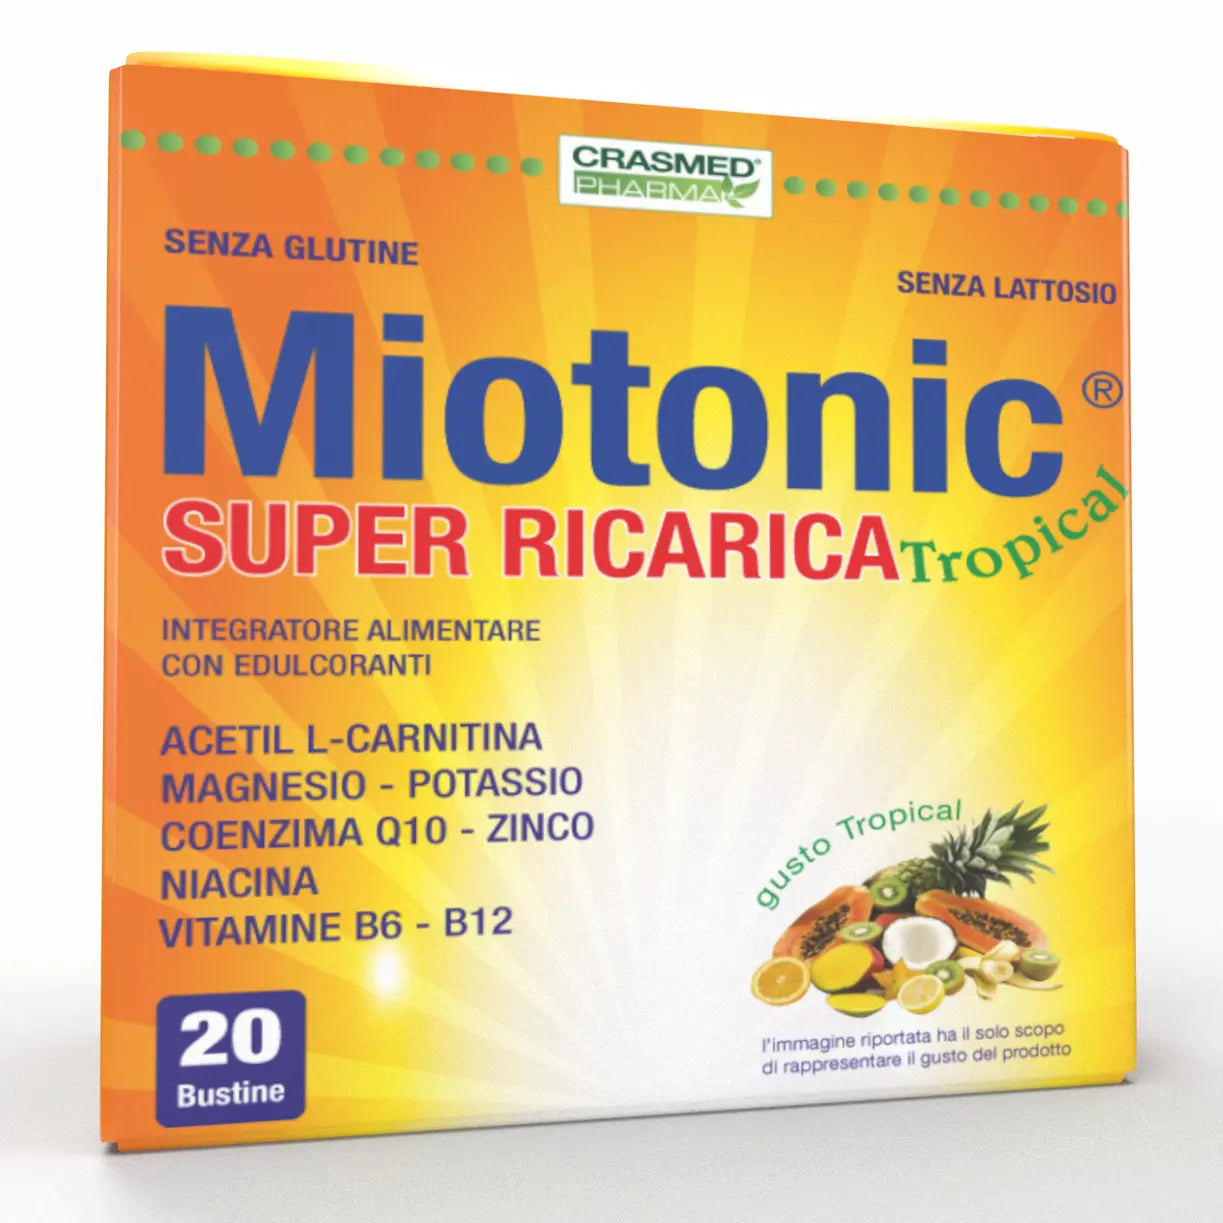 Miotonic® Super Ricarica Tropical 20 Bustine